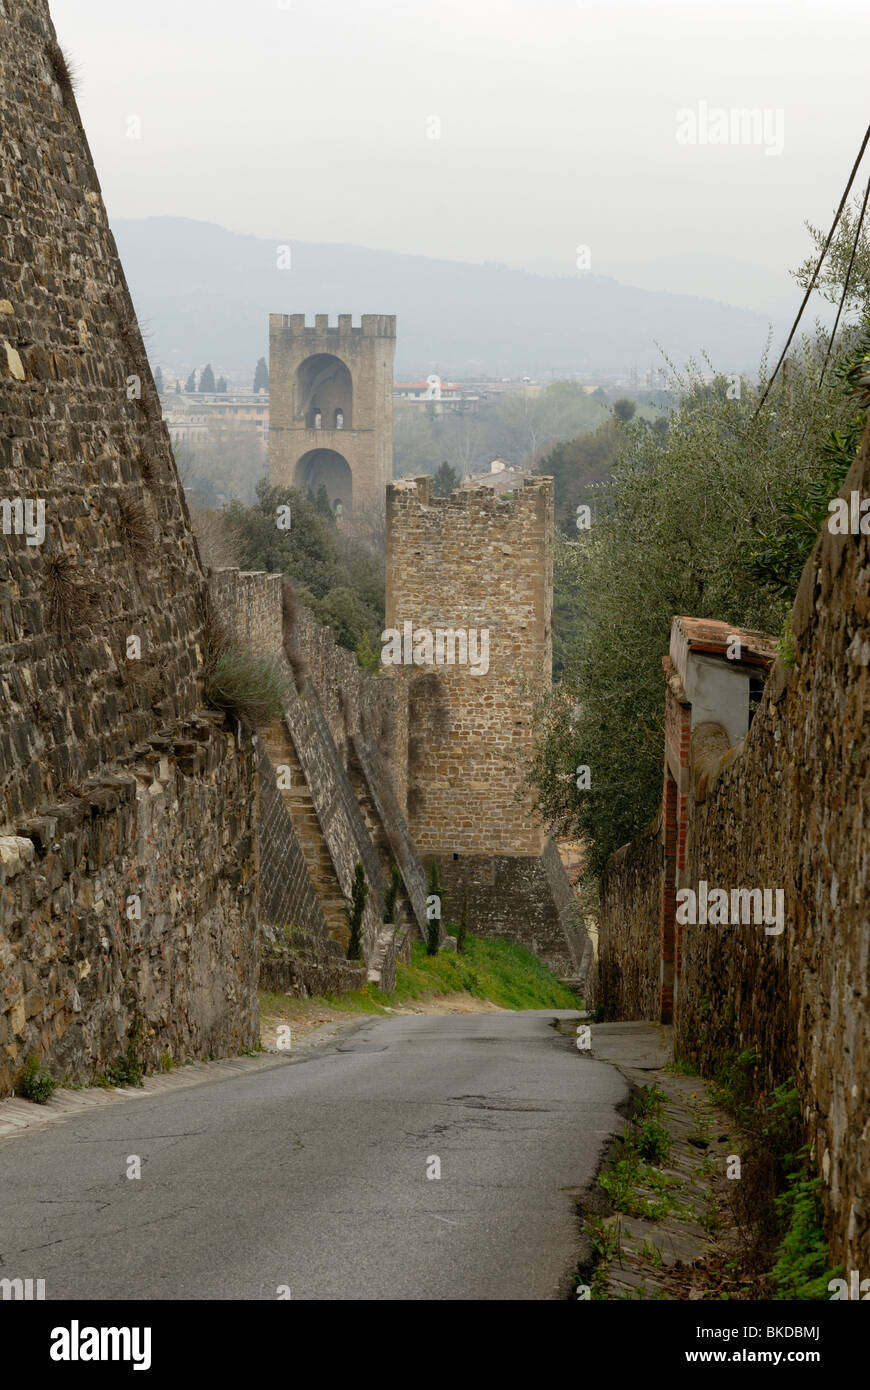 A spectacular misty spring morning view downhill along Via di Belvedery. On the left is the city walls and towers, dating from.. Stock Photo